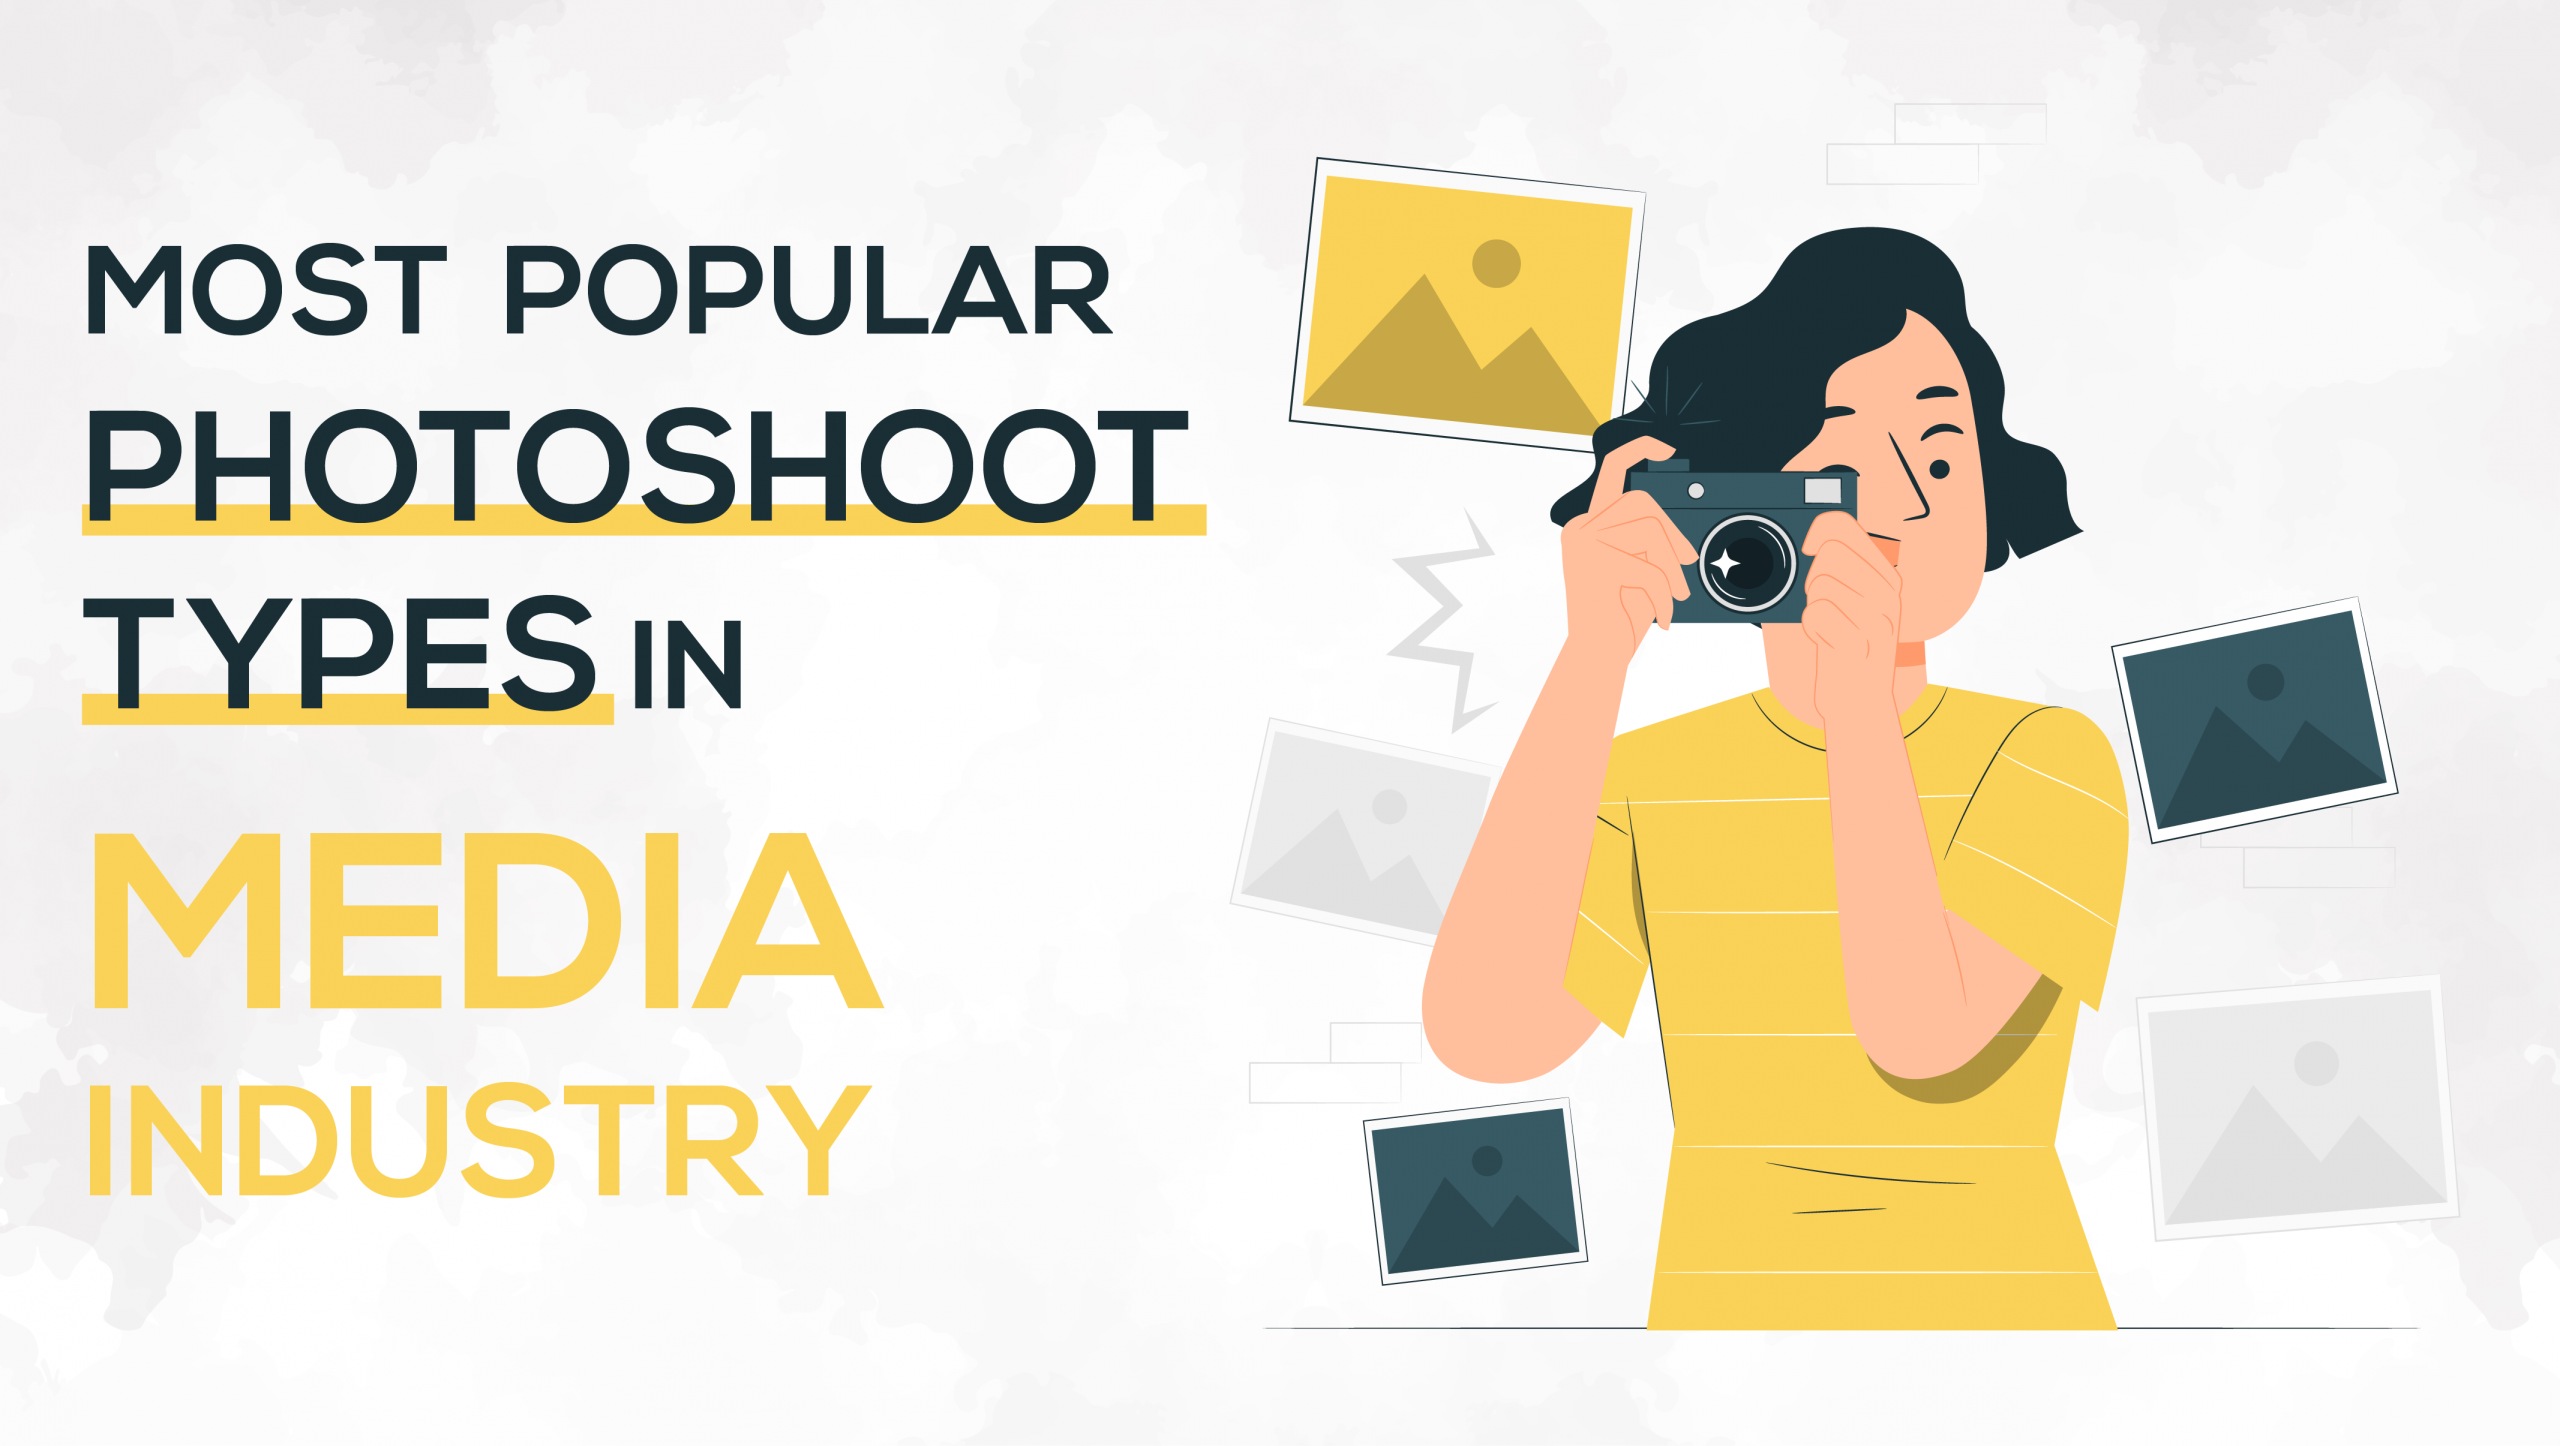 Most Popular Photoshoot Types in Media Industry